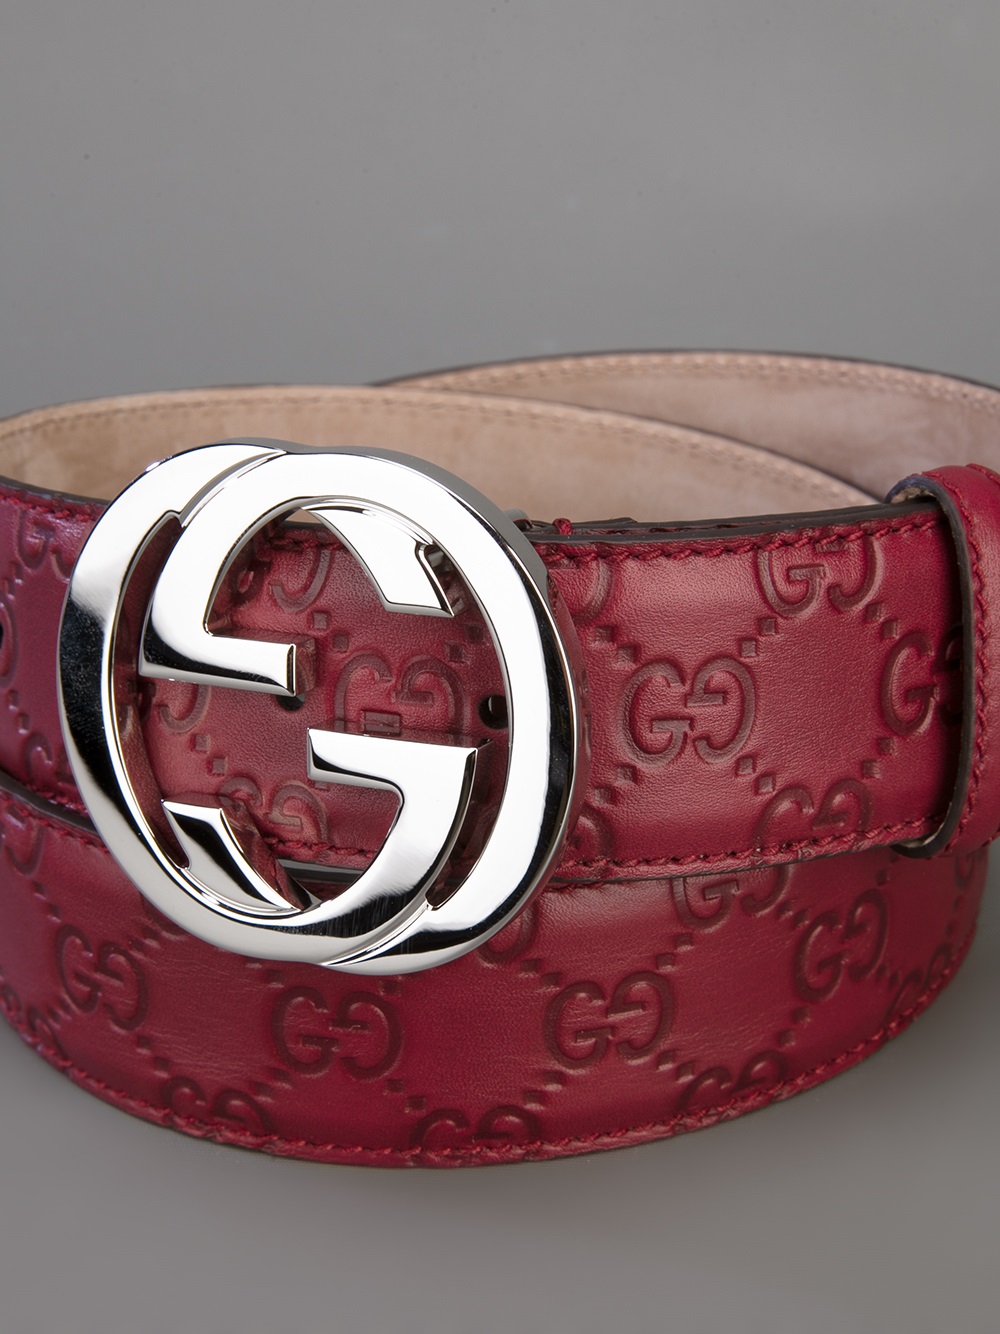 Gucci GG Marmont Embossed Buckle Belt in Blue for Men